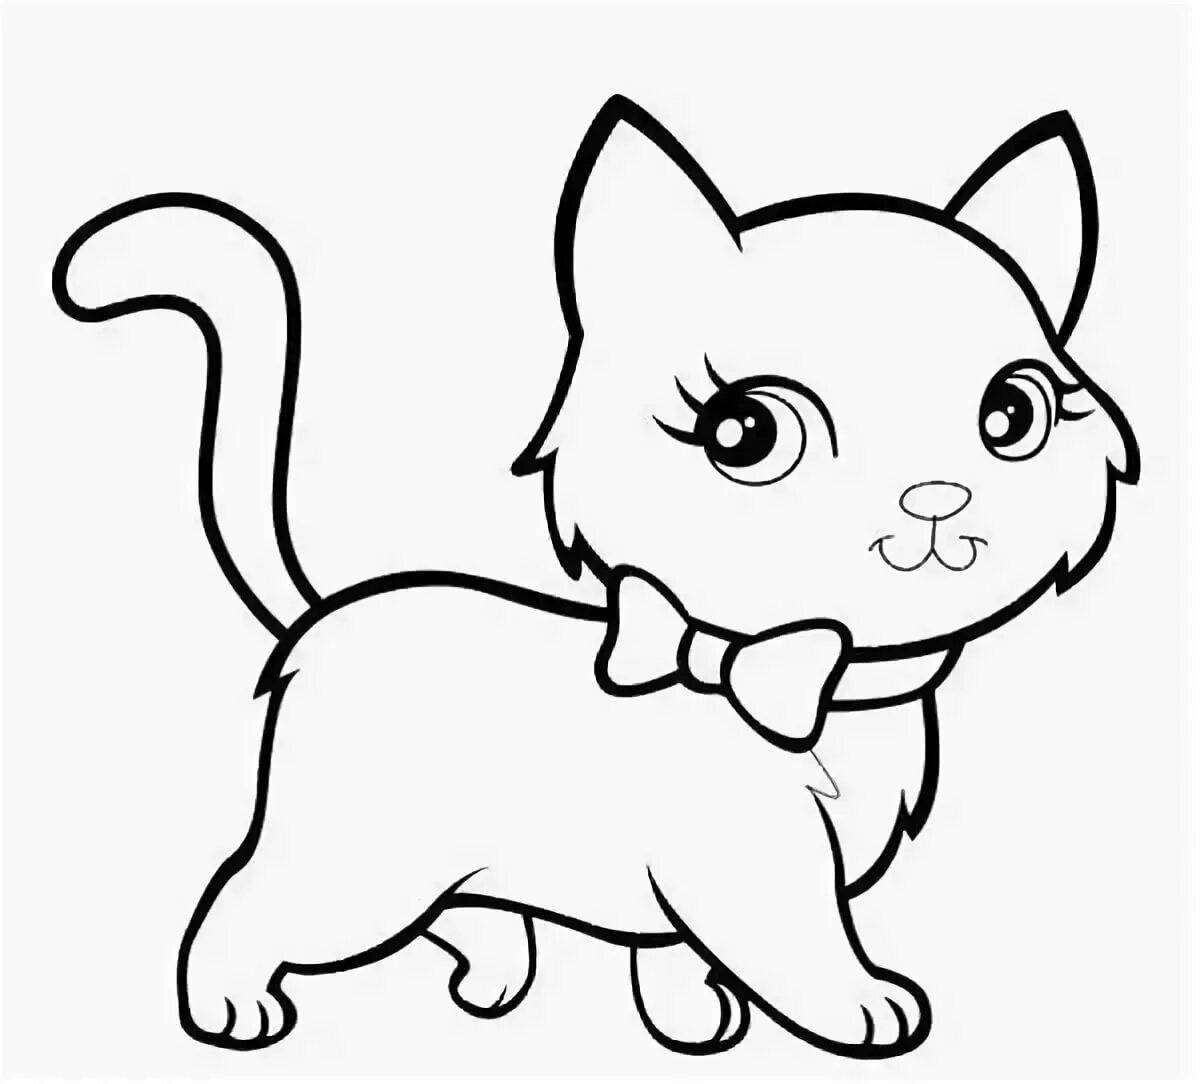 Majestic coloring book for girls, cats and kittens